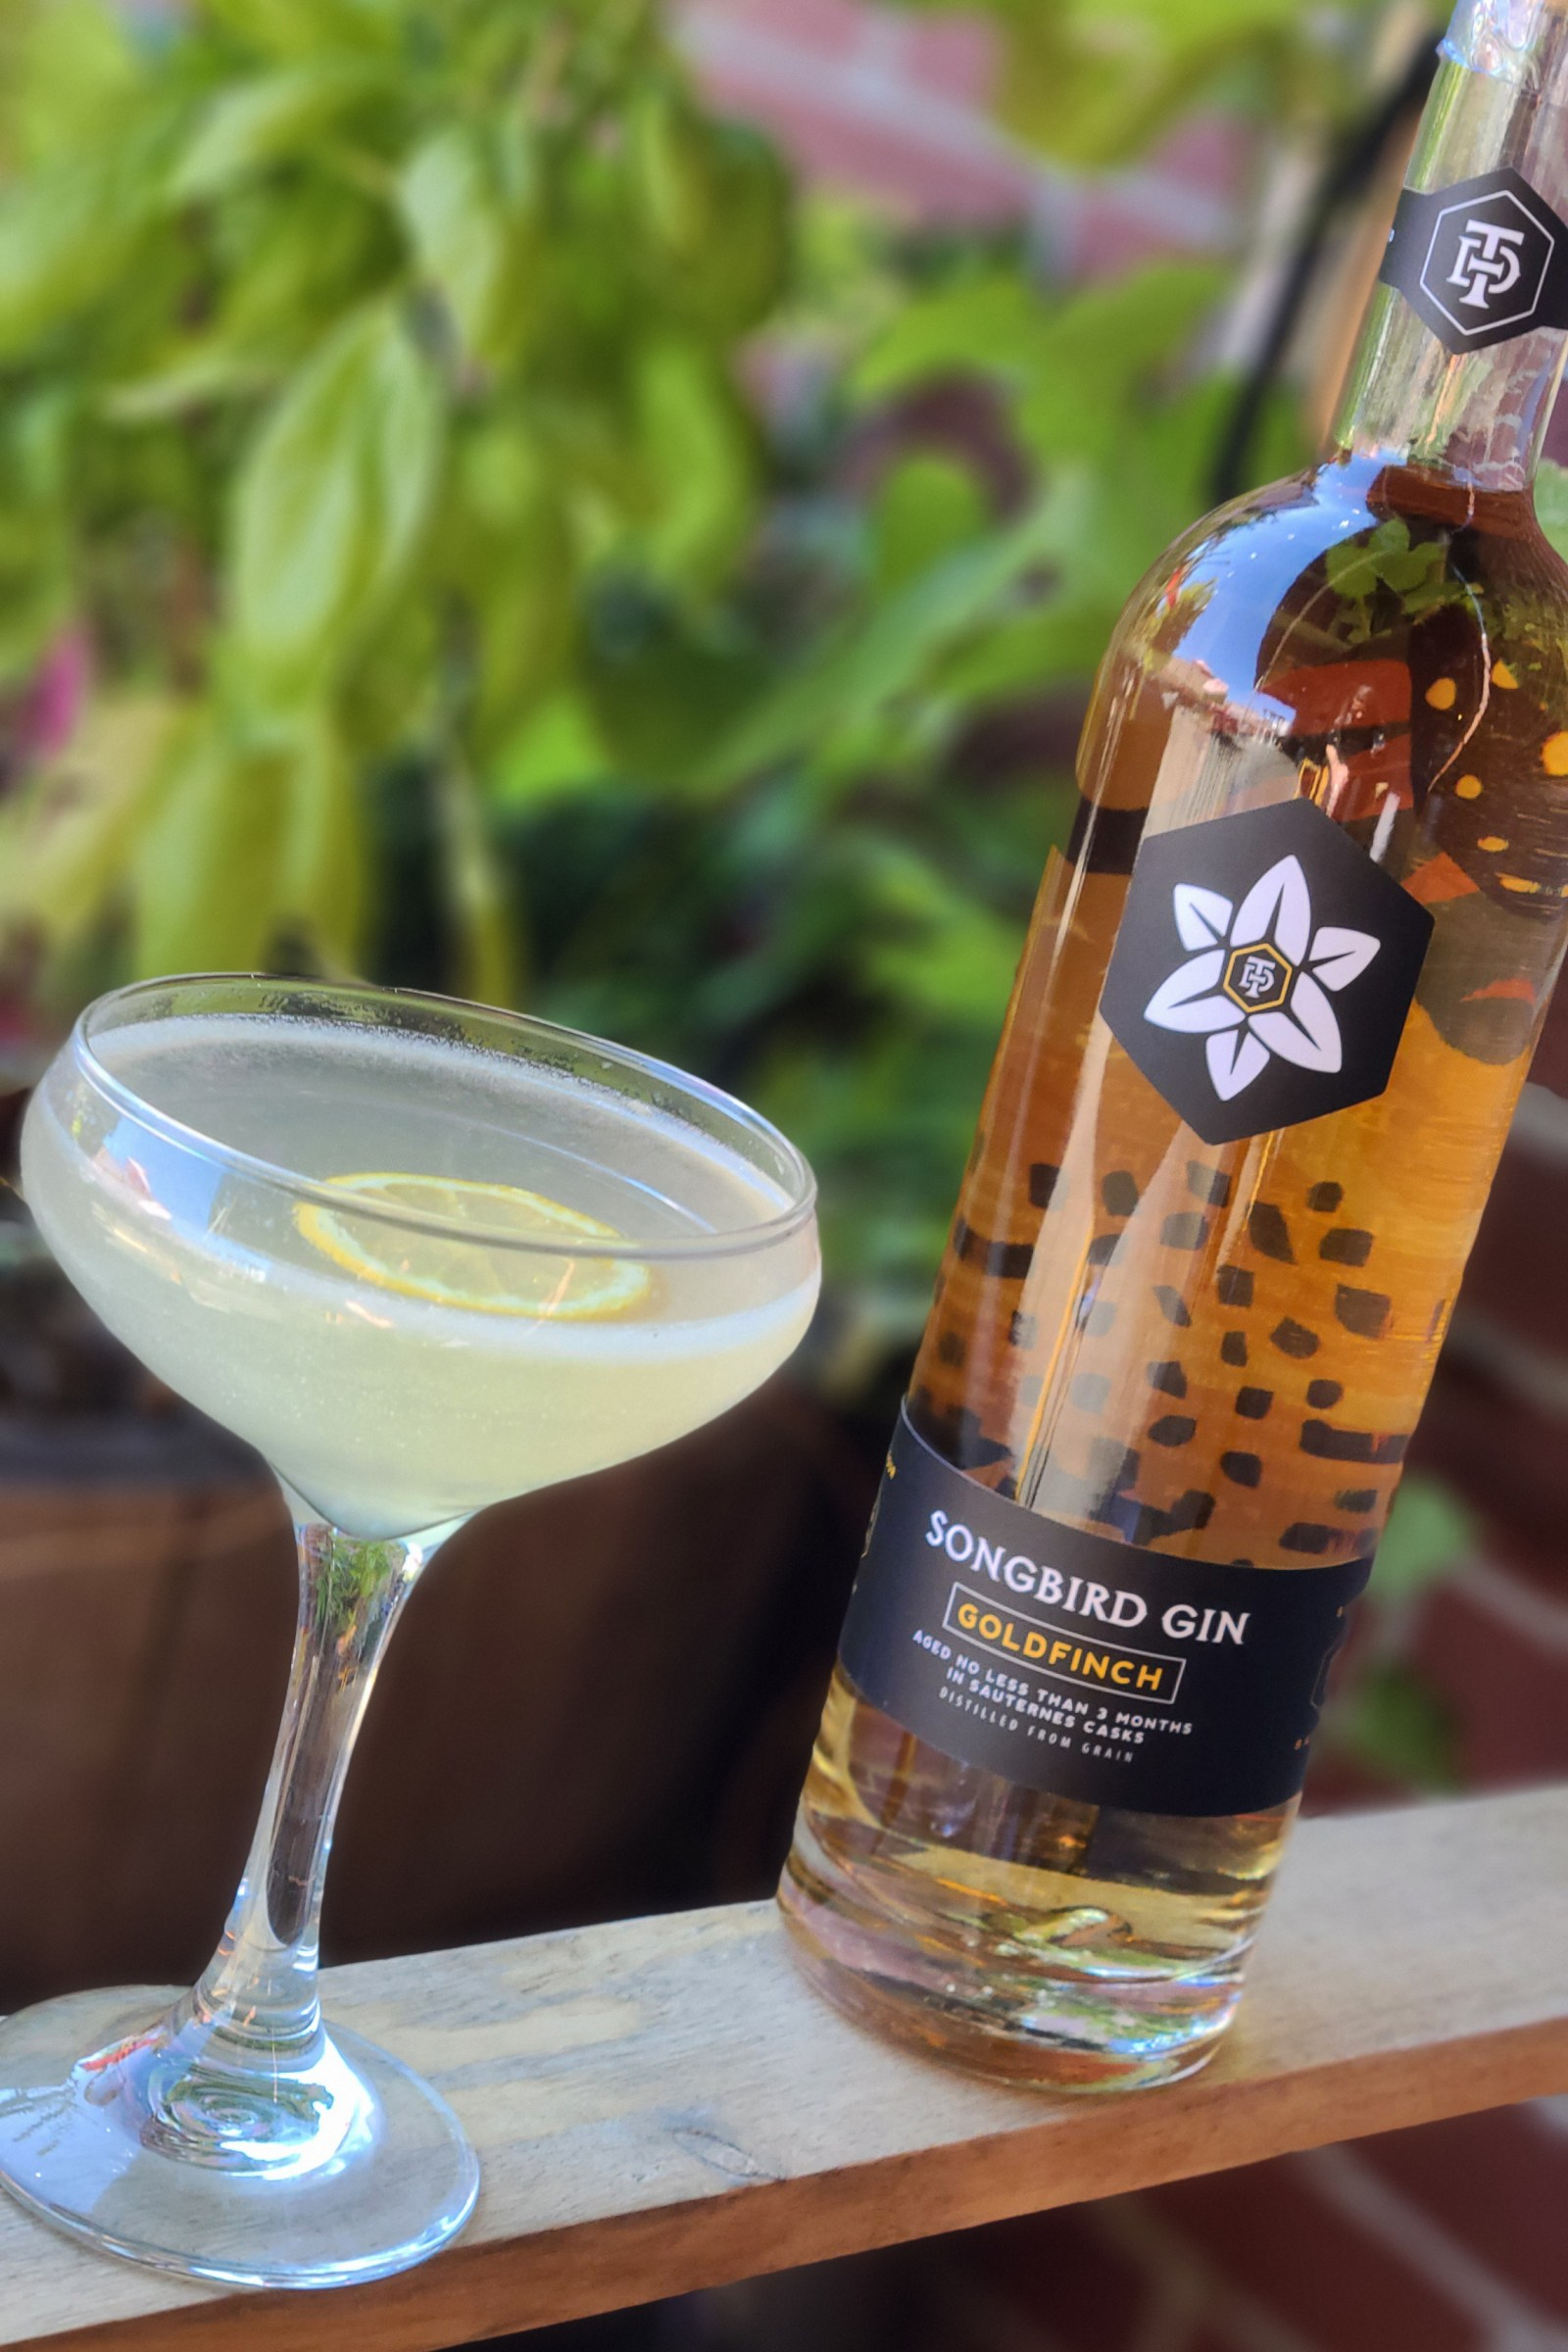 A bottle of Ty Iechdy Da Distillery's Songbird Goldfinch Gin sits on a table, next to a cocktail glass filled with a yellow drink.